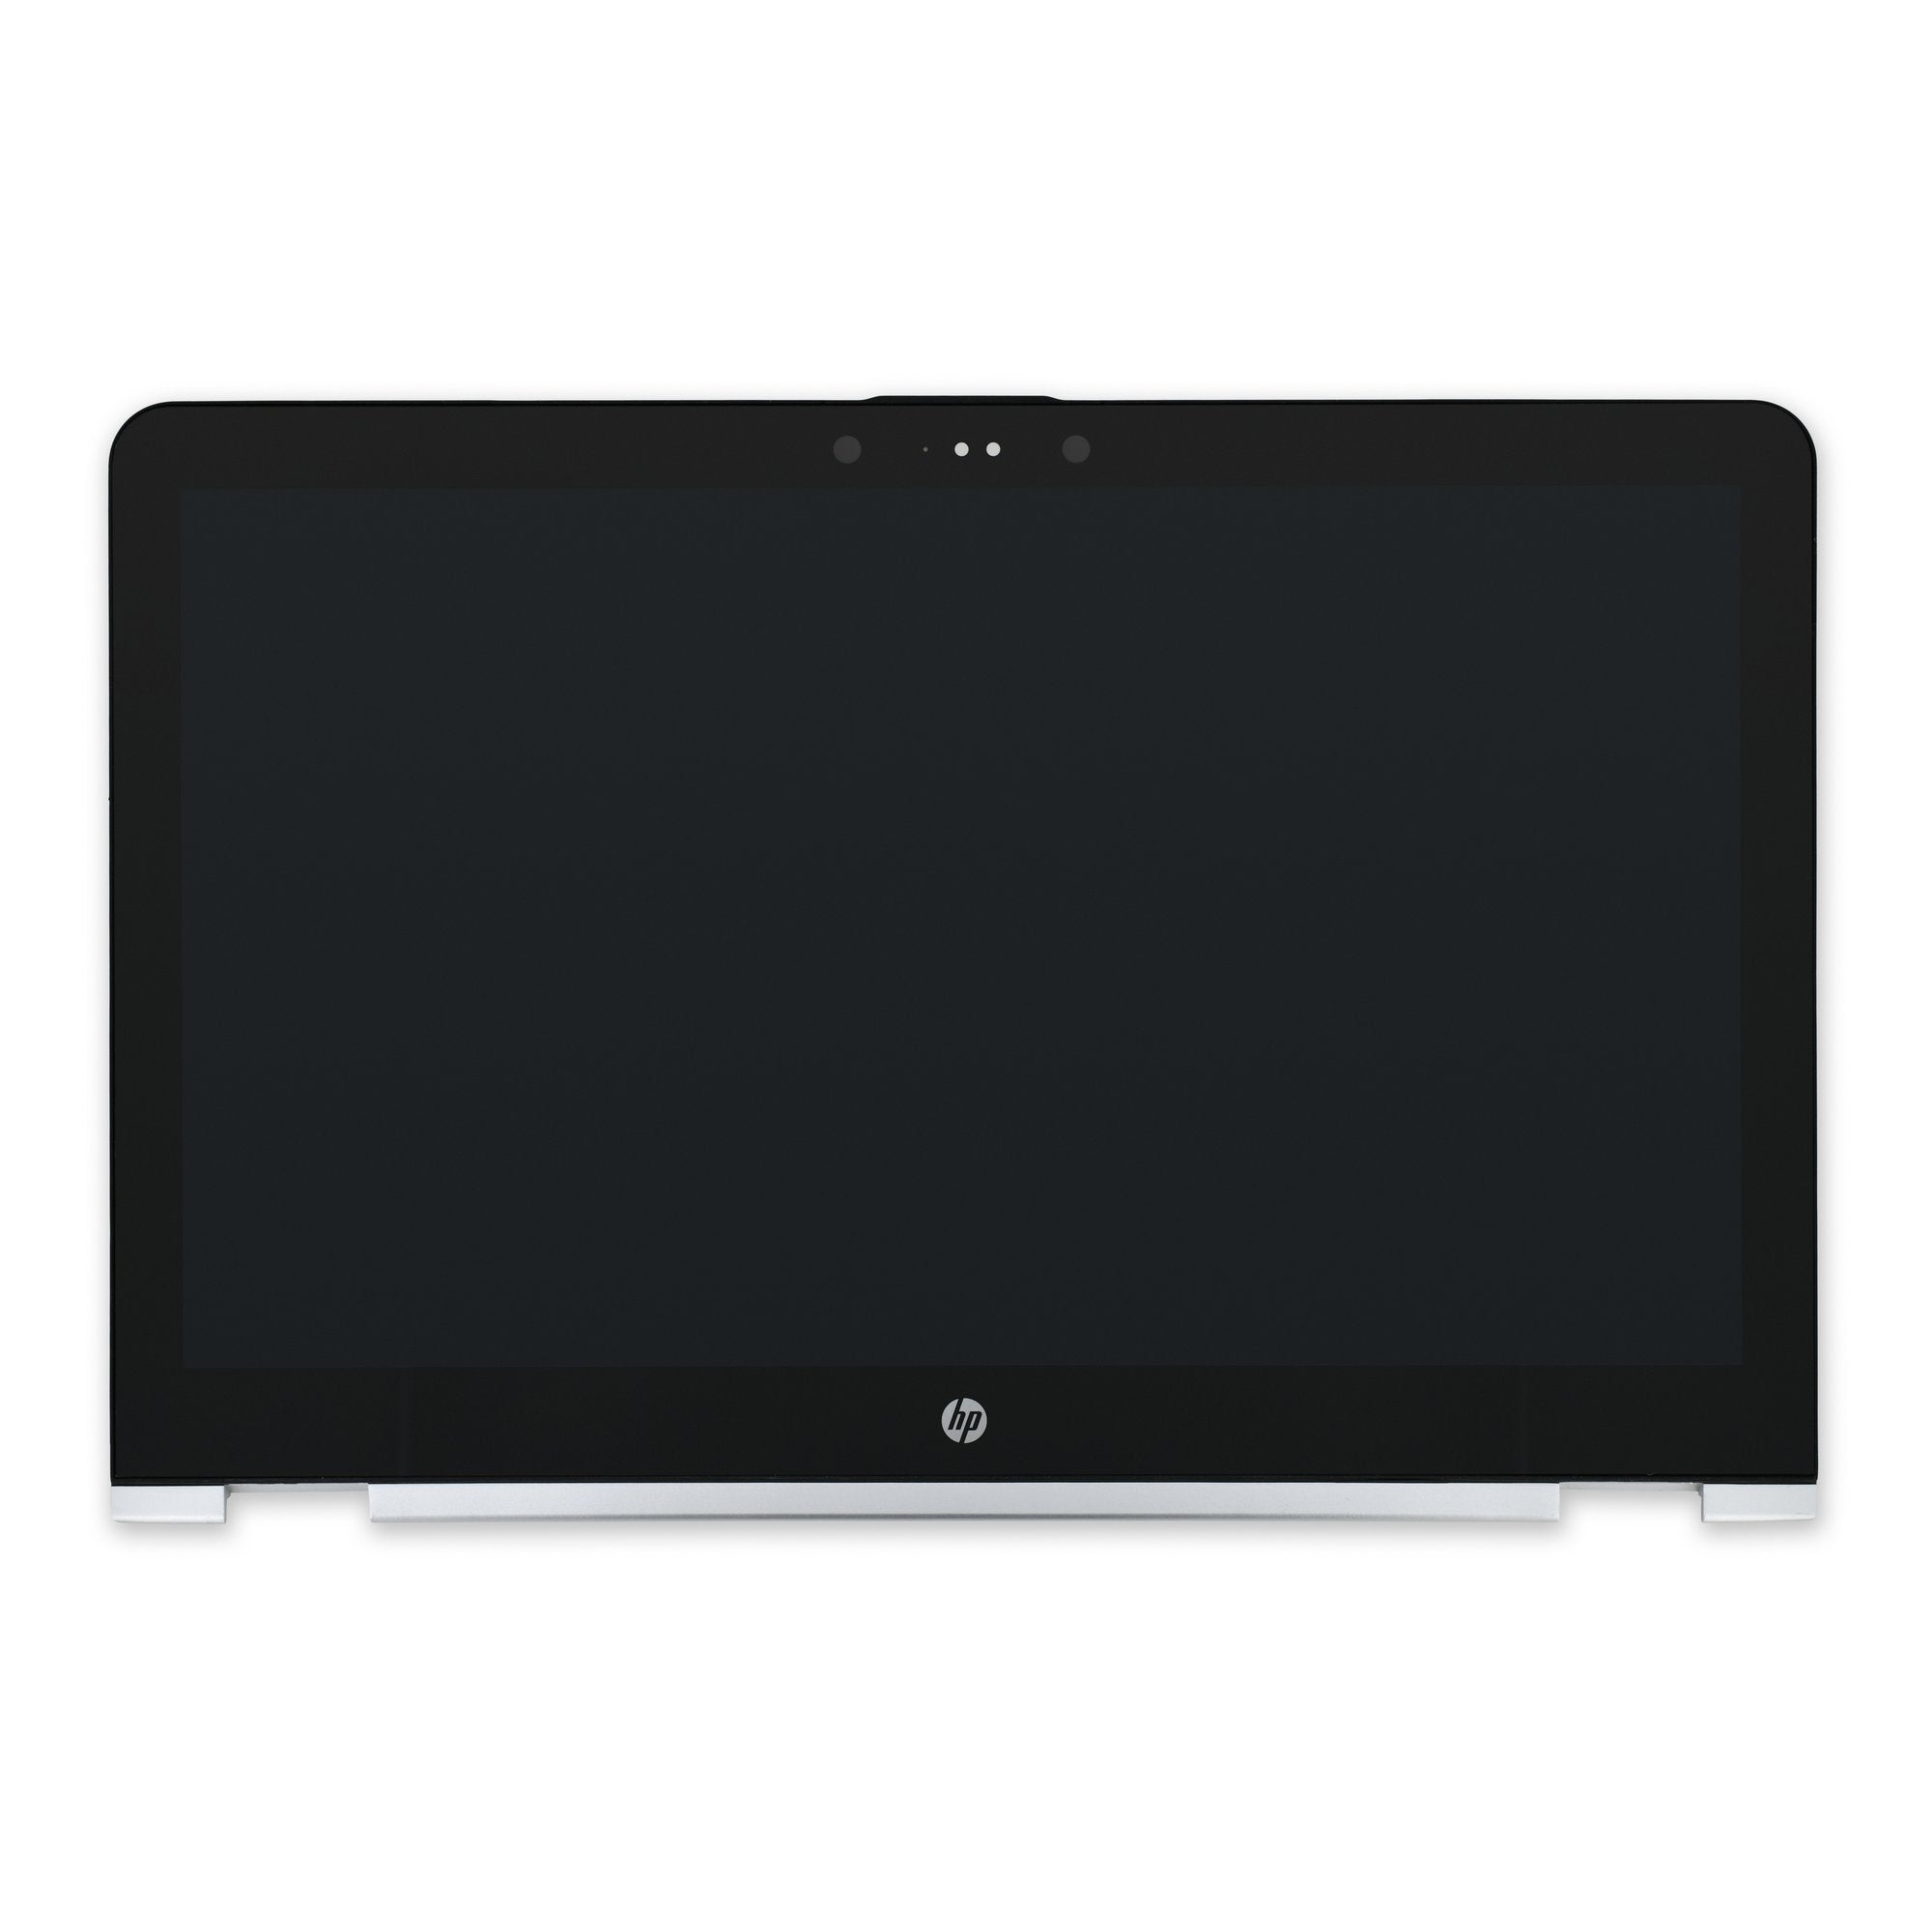 HP Envy 15 Display with IR Camera Opening New